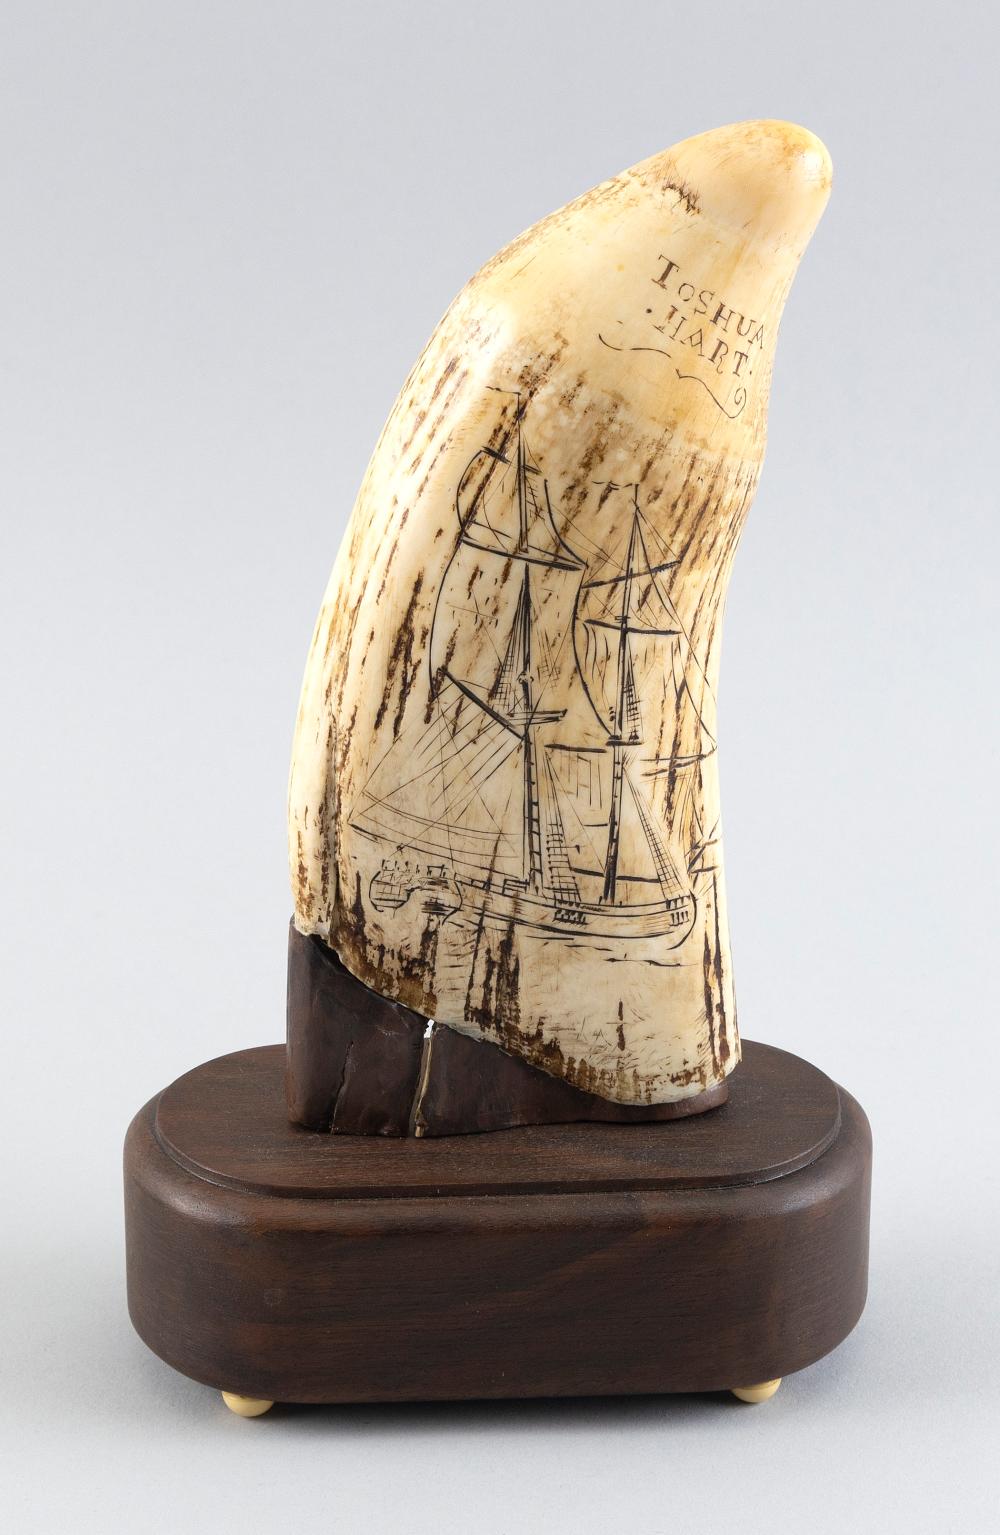  ENGRAVED WHALE S TOOTH TOSHUA 3505a3